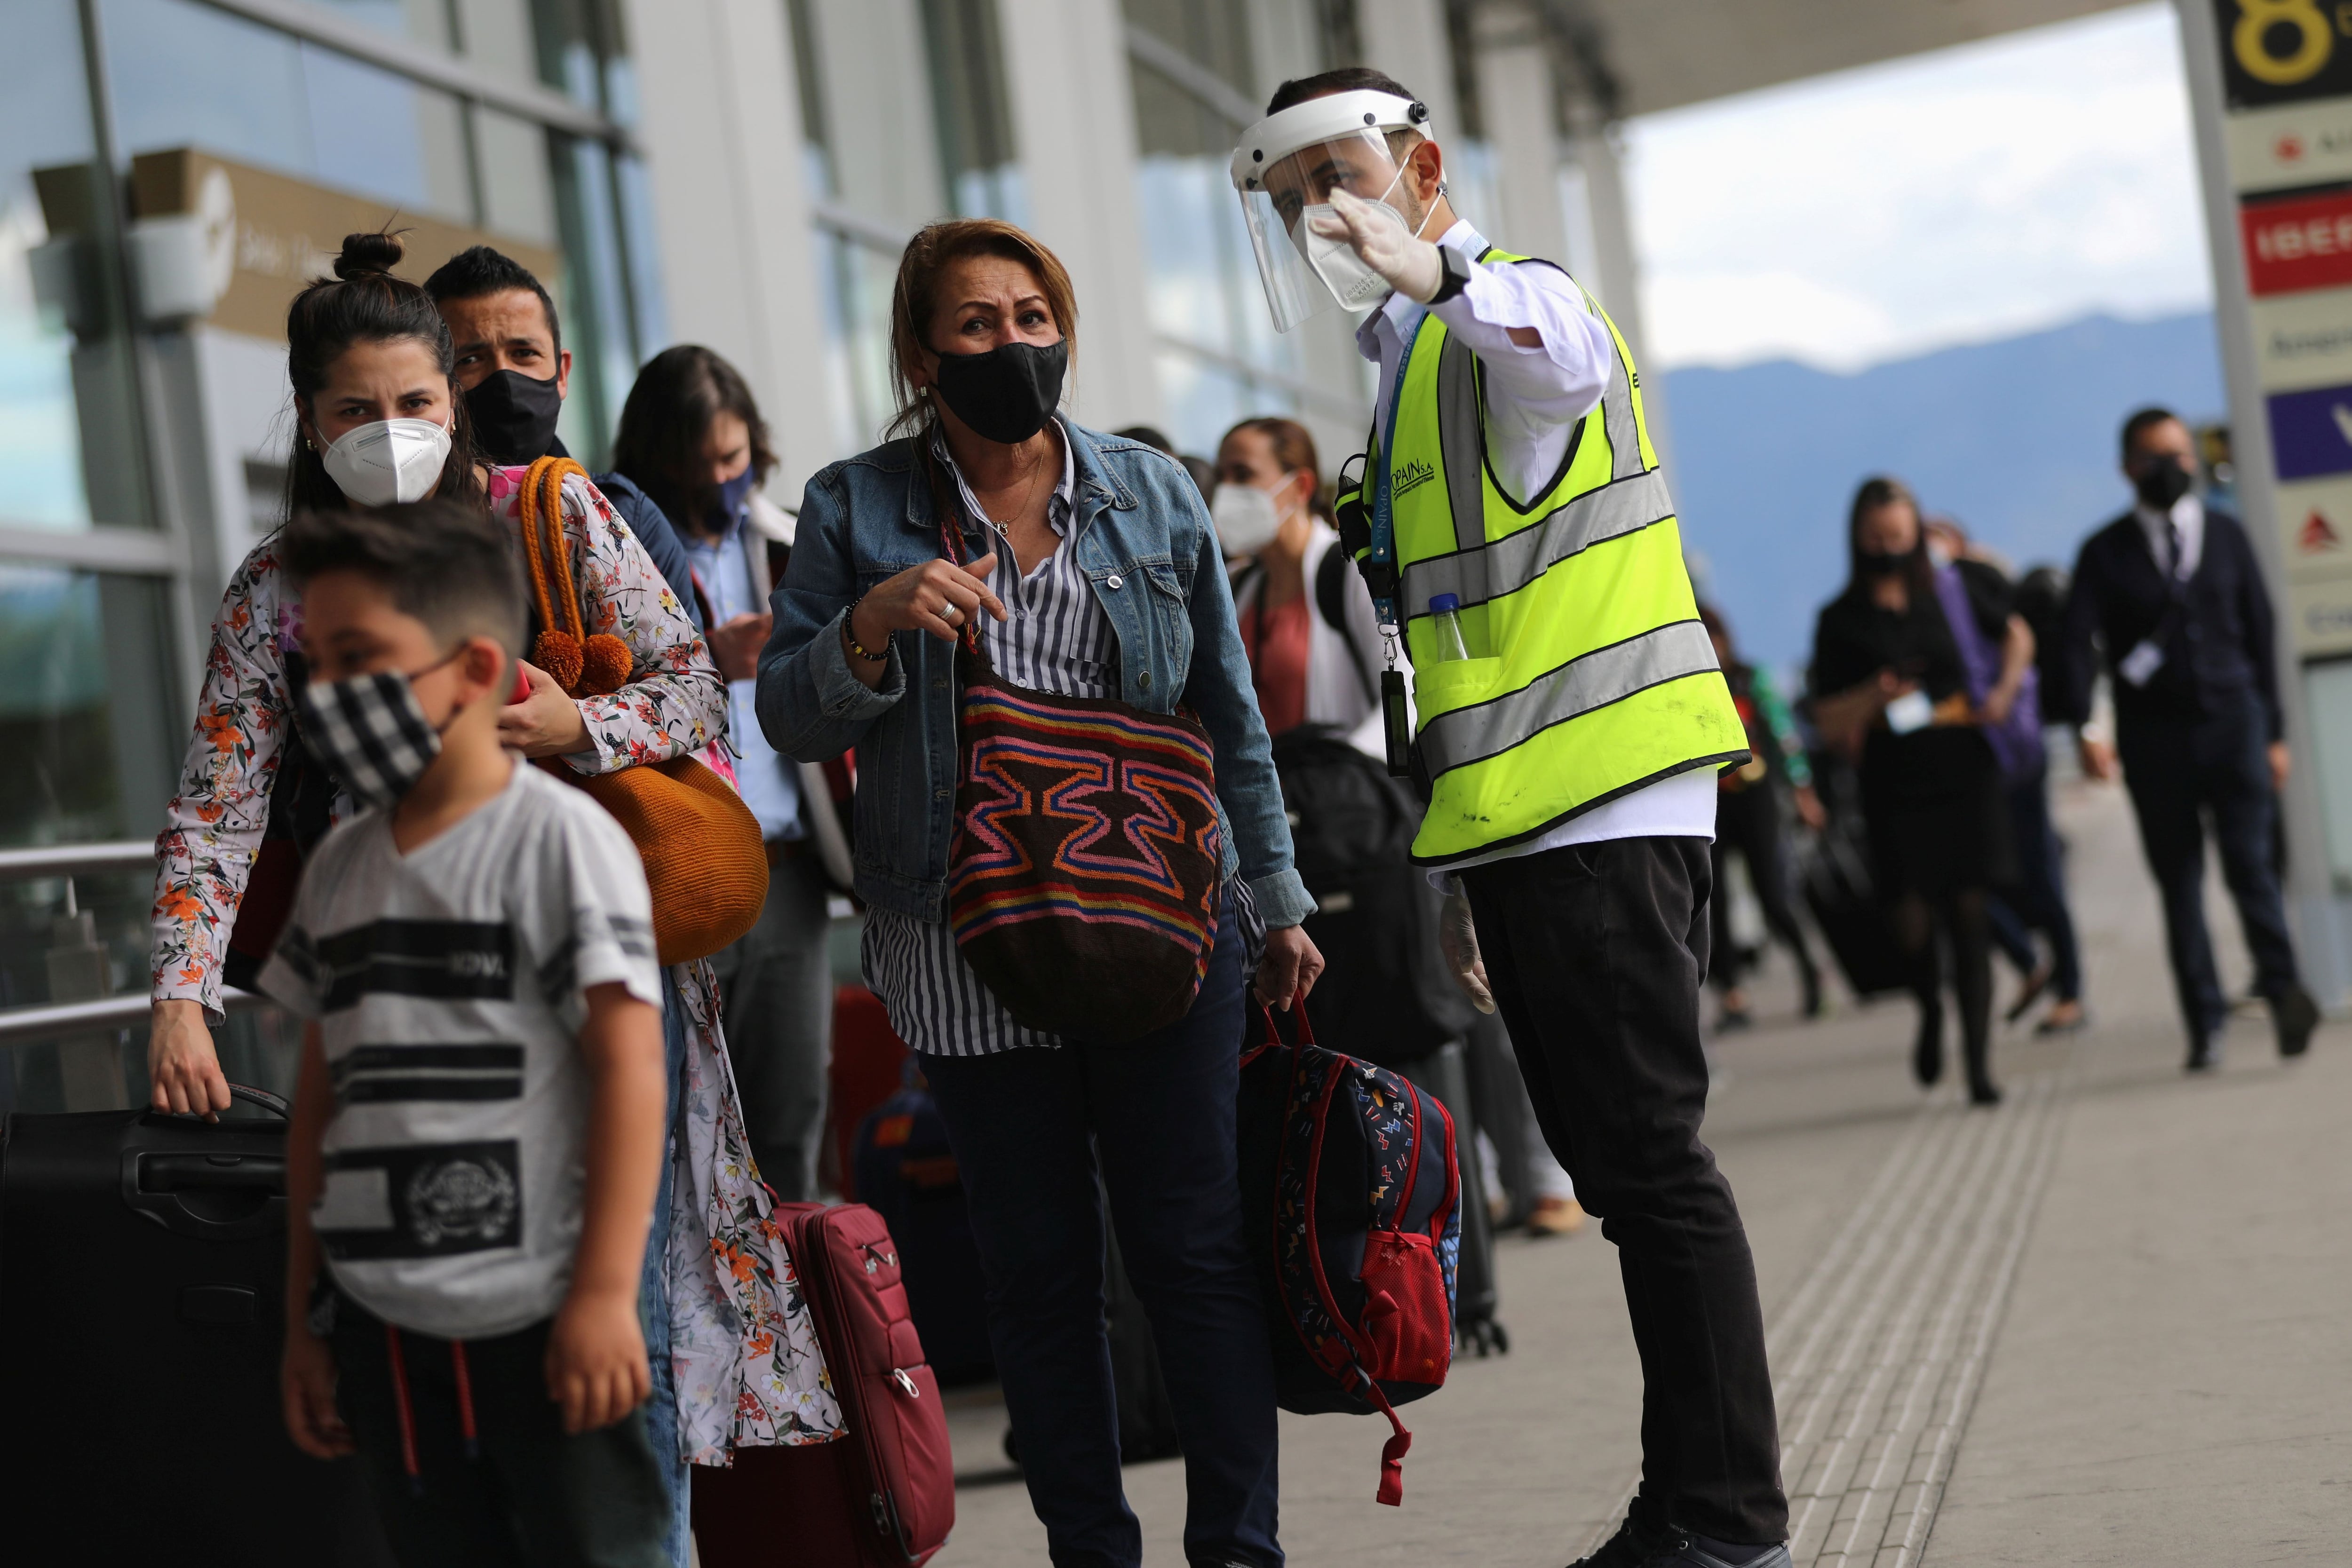 An employee of El Dorado International Airport wearing a face screen and mask gives directions to a female passenger, after the Colombian government decreed restrictions on flights from the United Kingdom, over fears of a new strain of the coronavirus, amid the spread of the coronavirus disease (COVID-19), in Bogota, Colombia December 21, 2020. REUTERS/Luisa Gonzalez